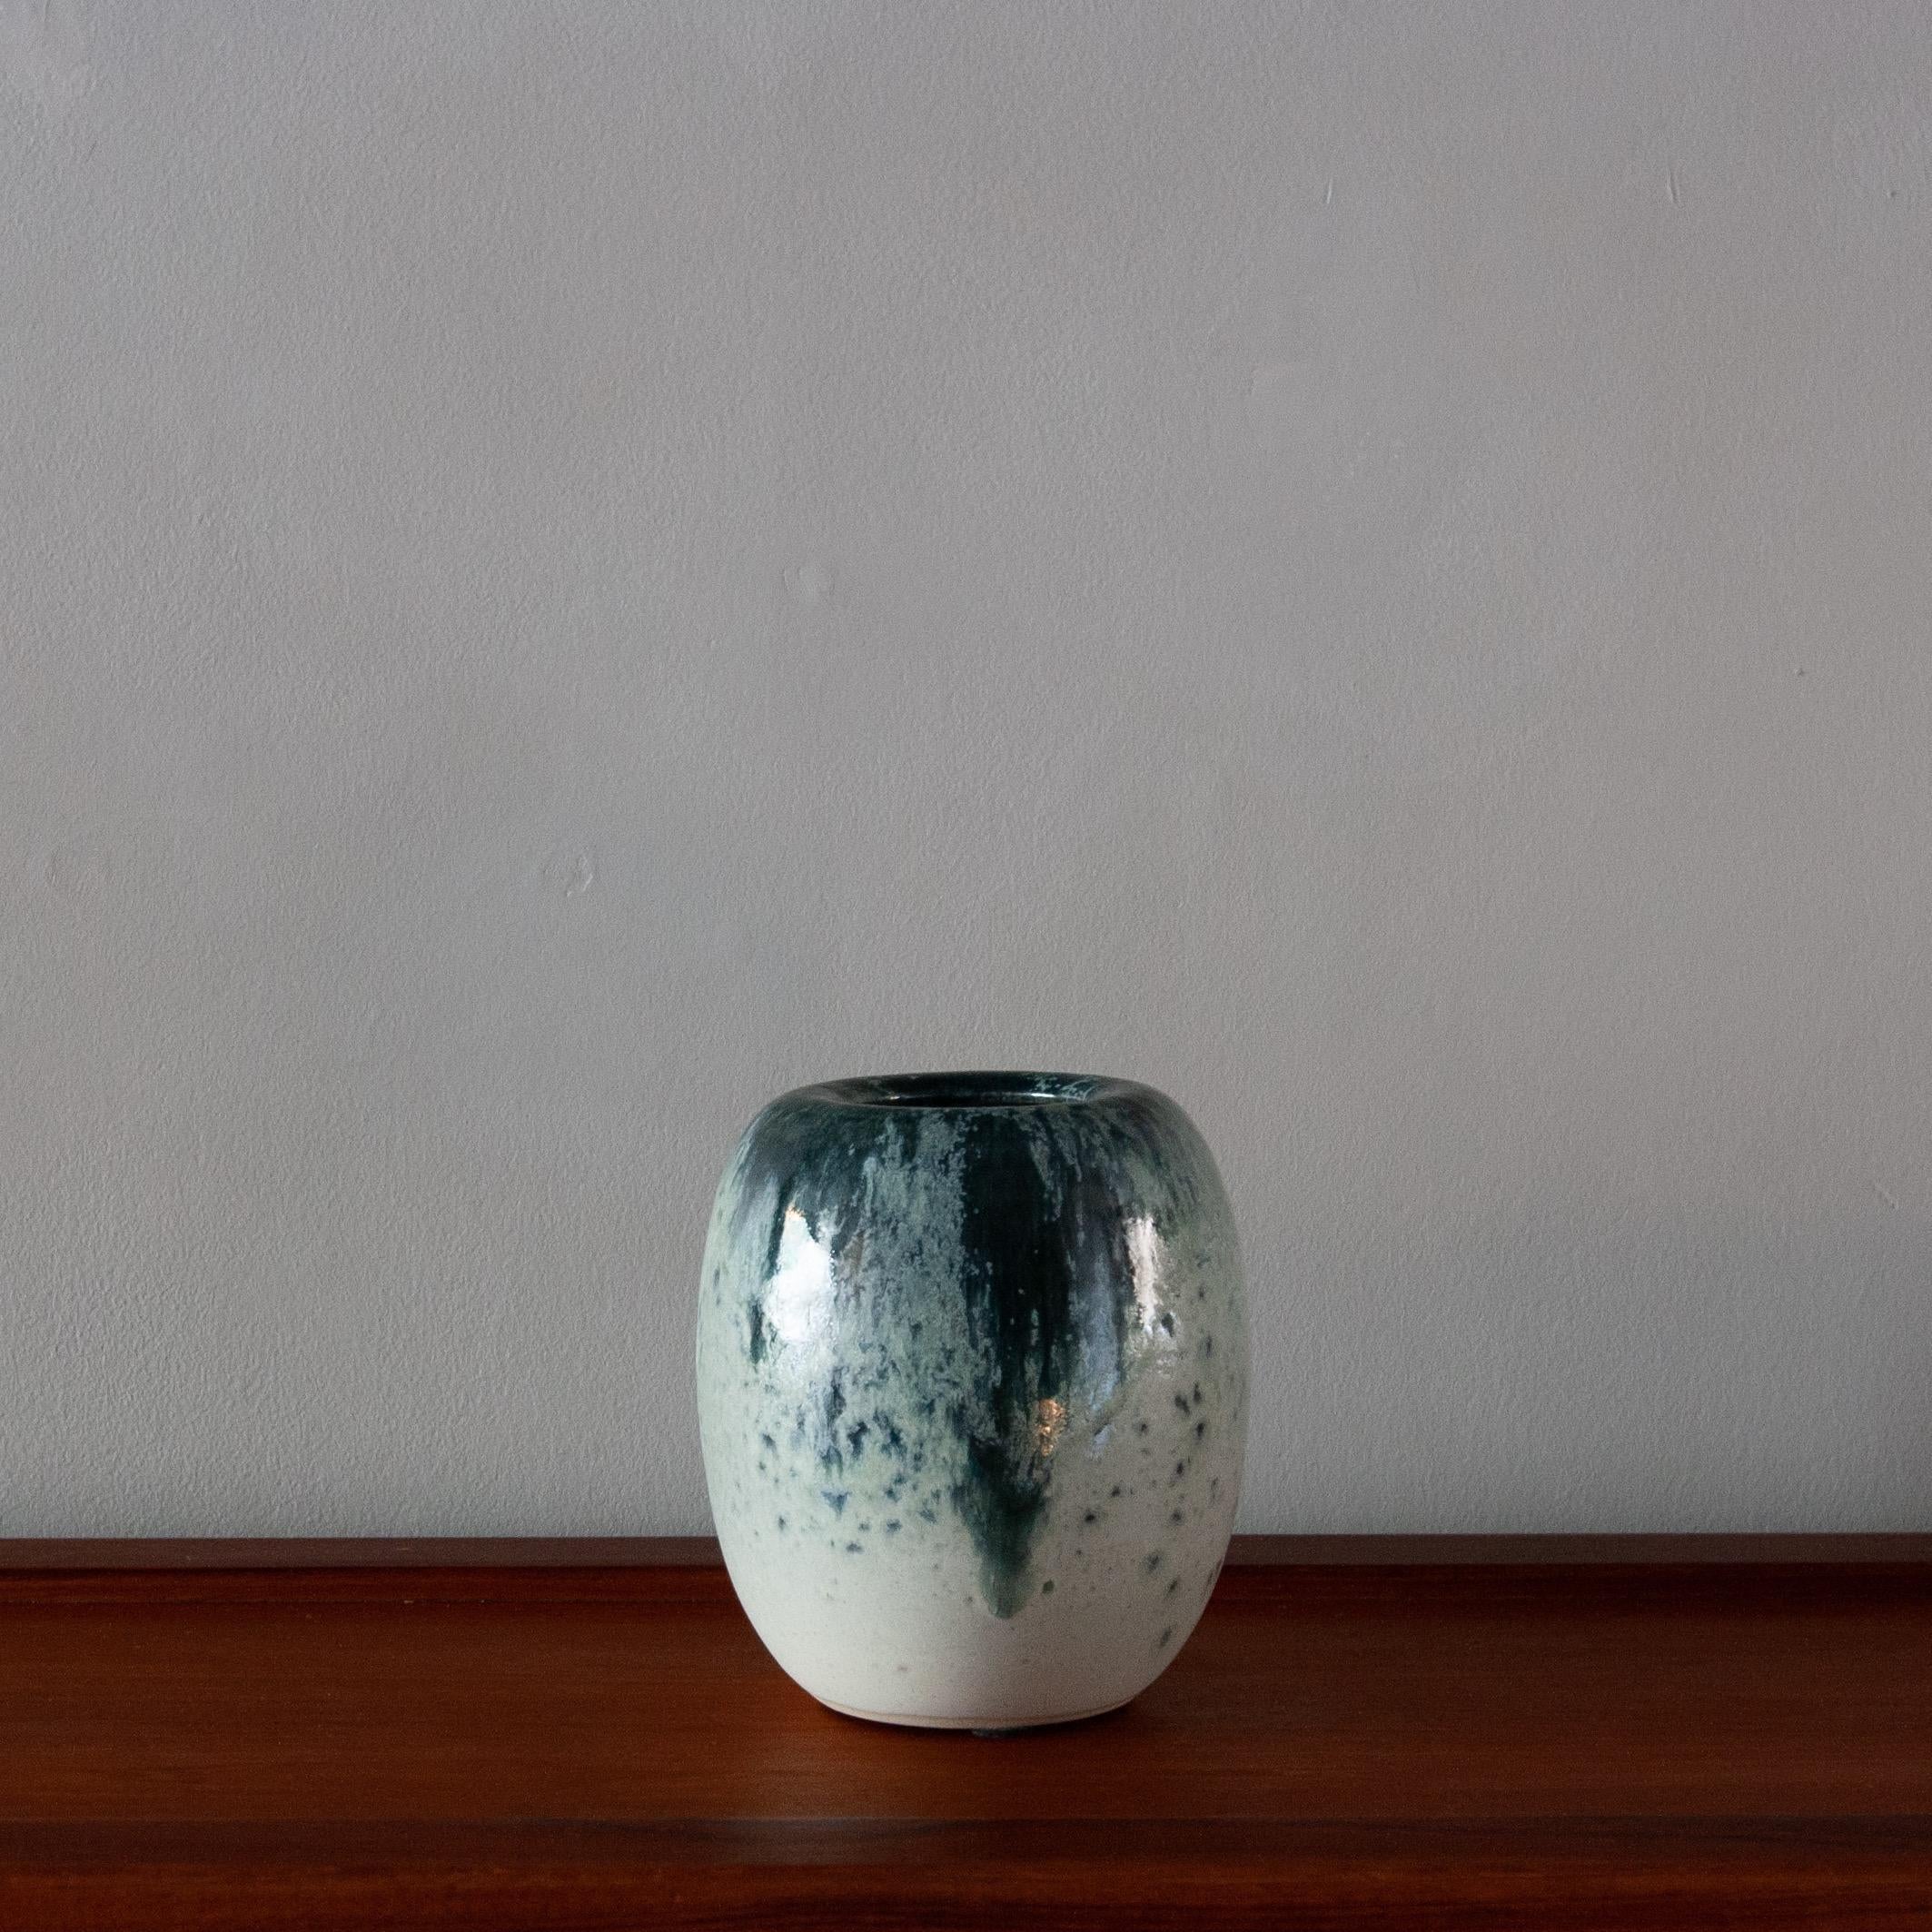 Aage and Kasper Würtz are a father and son team of studio ceramicists based near Horsens in eastern Jutland, Denmark.
Known internationally for their hand-thrown and hand-glazed ceramics they have produced bespoke collections for distinguished fine